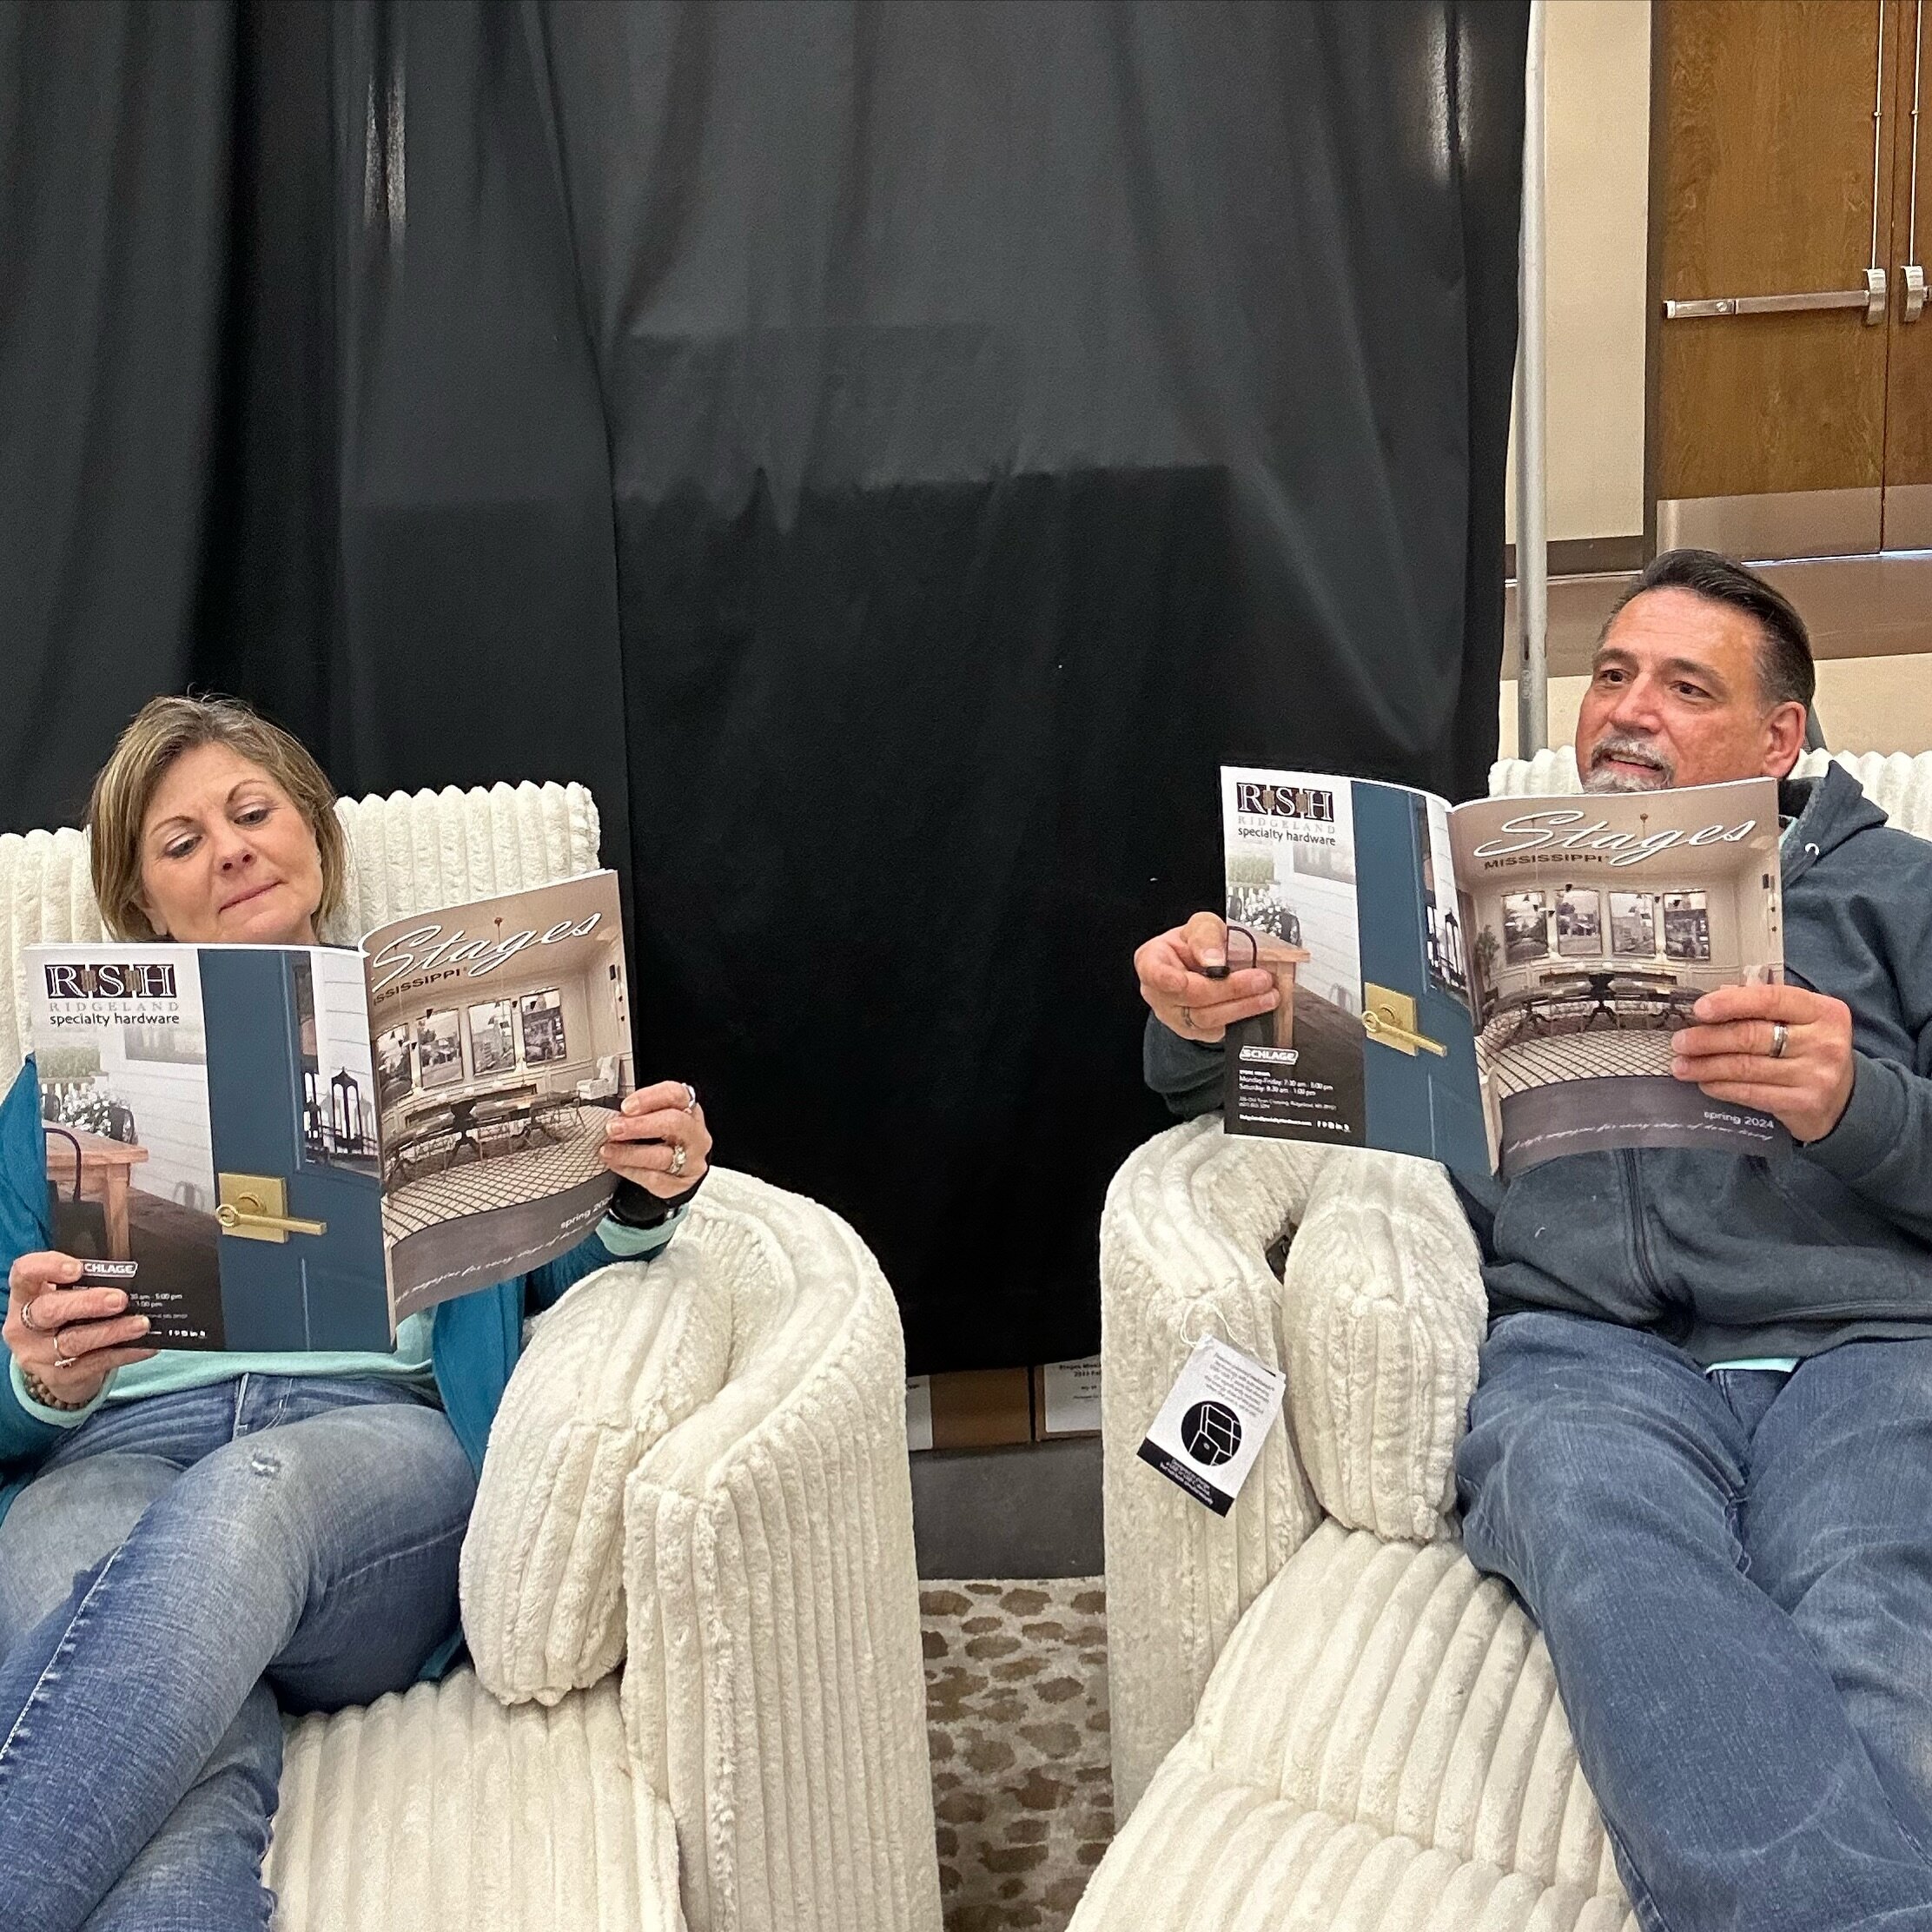 Susan and Stephen taking a break while setting up for The Home Show. Thank you Ross Furniture for the comfy chairs! @rossfurniture.ms  @hbajackson 

Come see us Saturday and Sunday 10-5 at the Clyde Muse Convention Center in Pearl. 

Stages MS

#stag